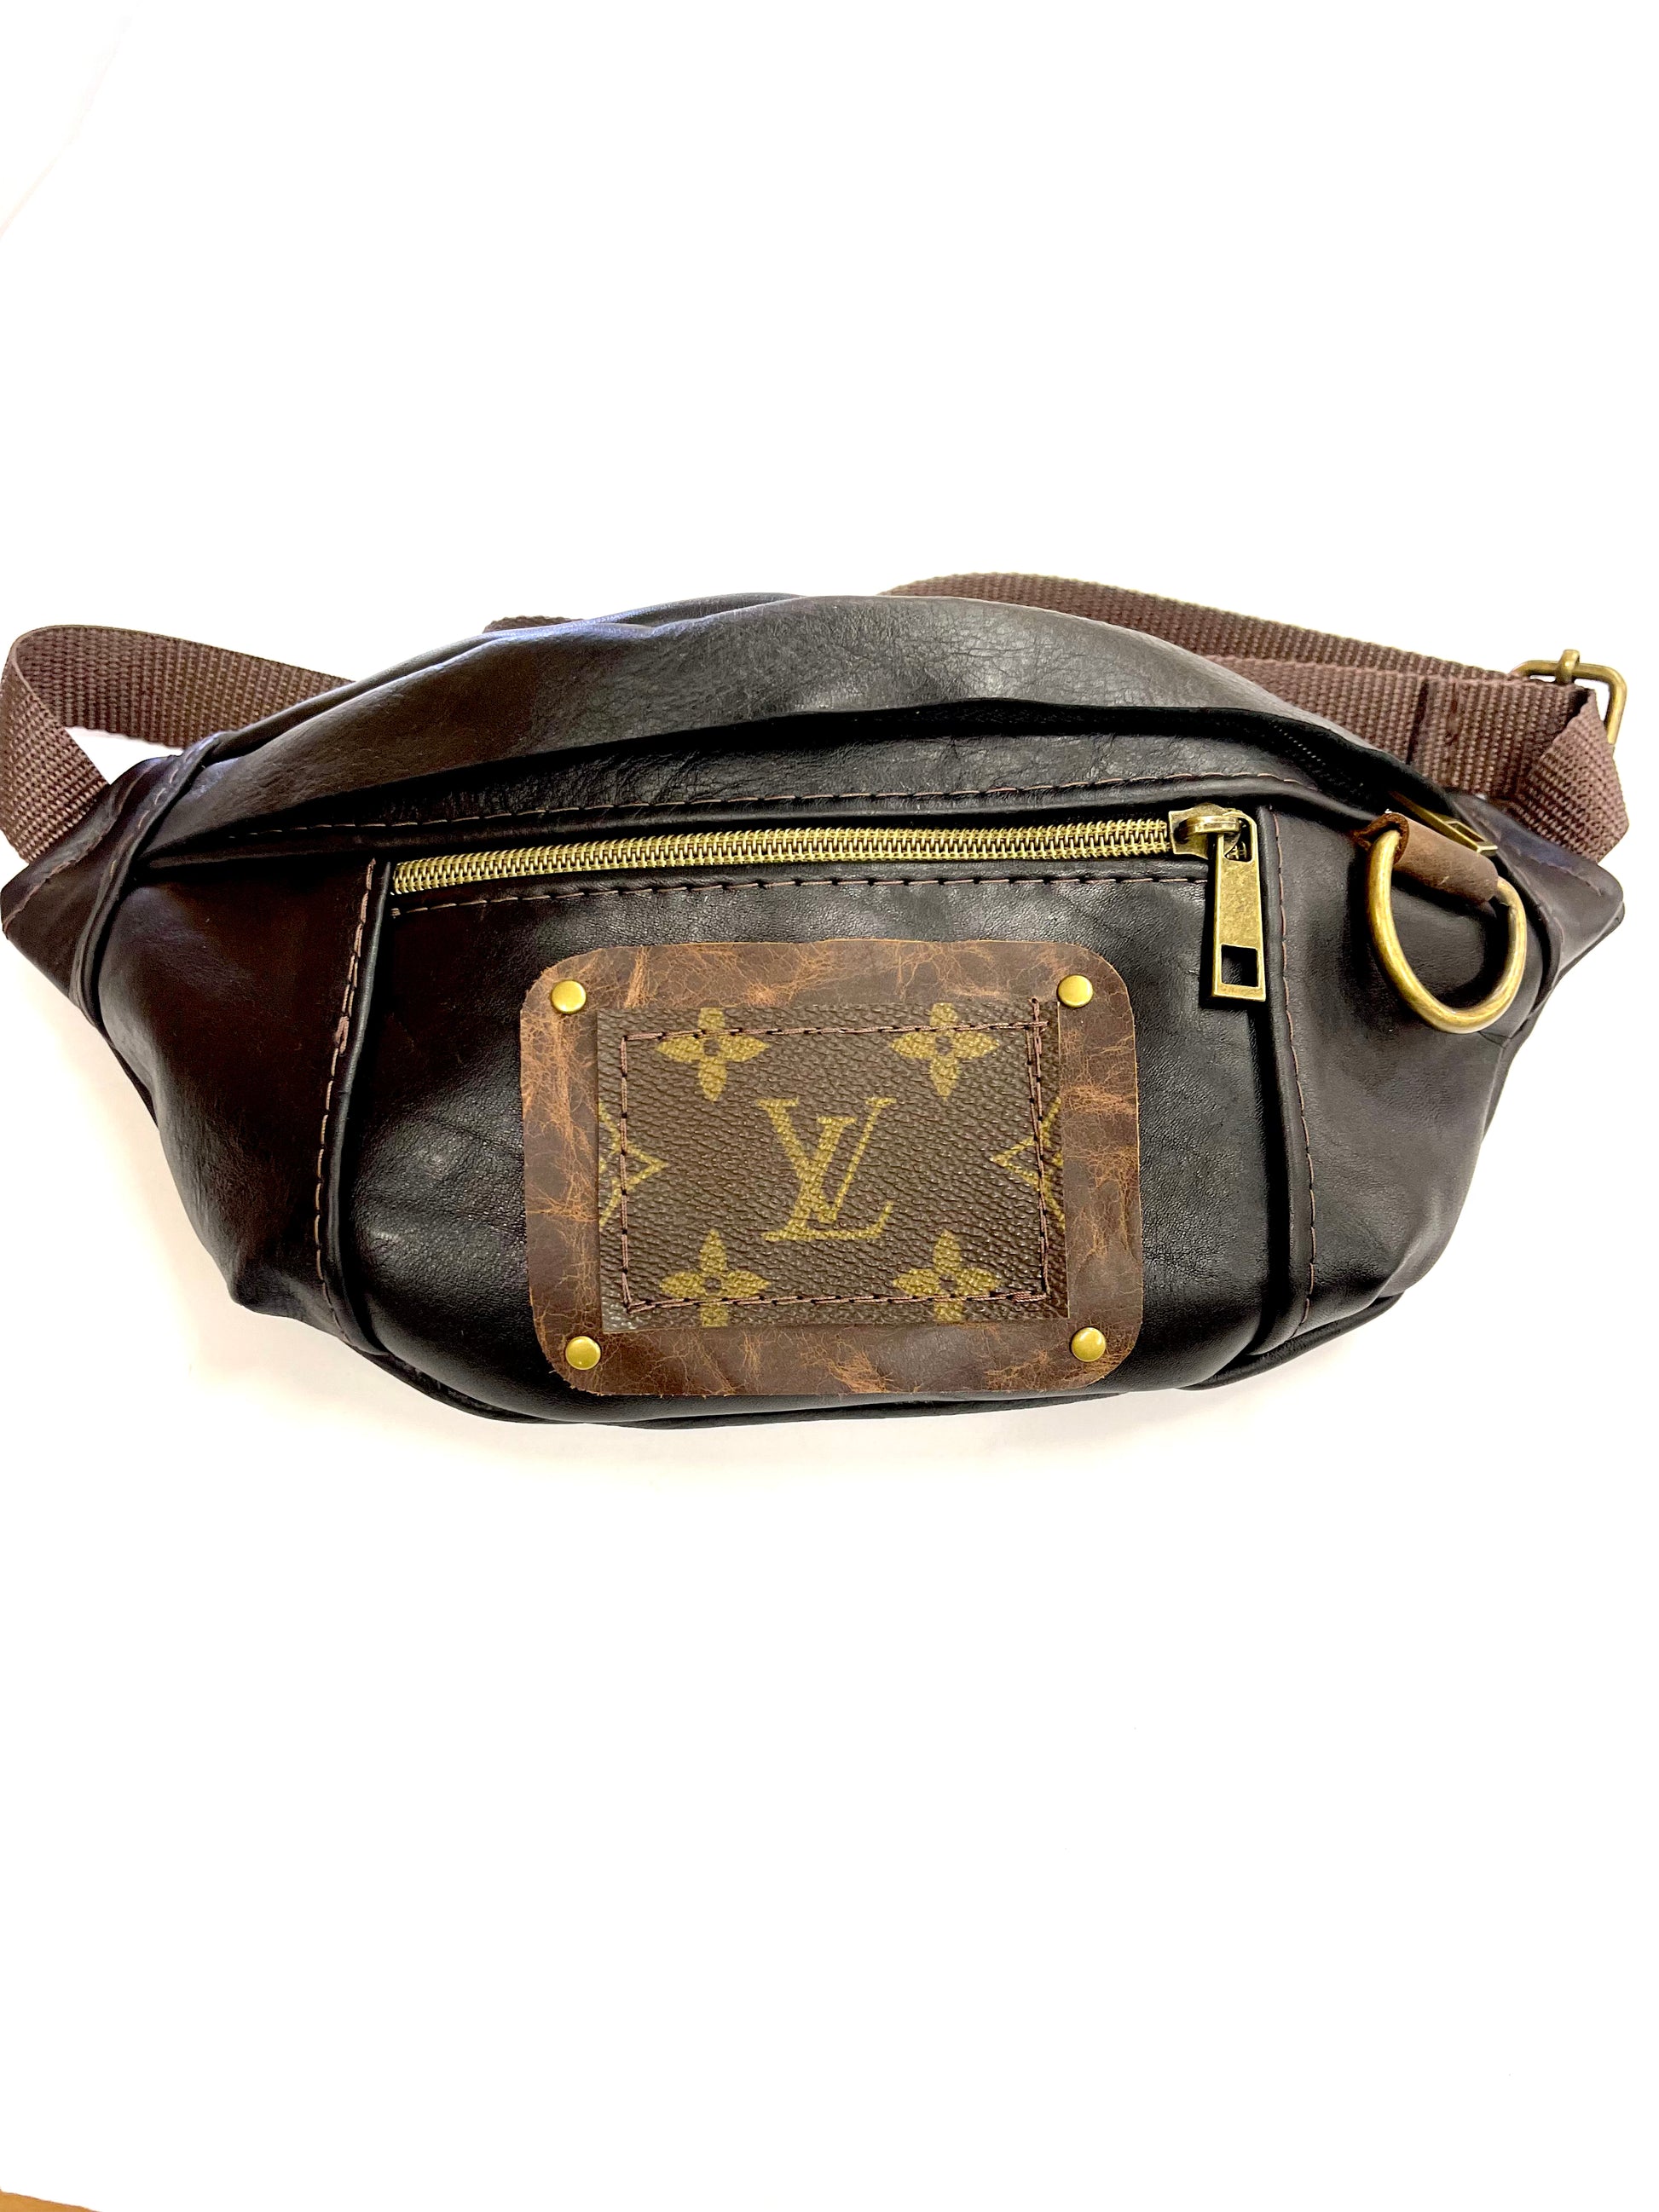 Adjustable Bum bag with a PATCH LV multiple color options - Patches Of Upcycling Black Patches Of Upcycling